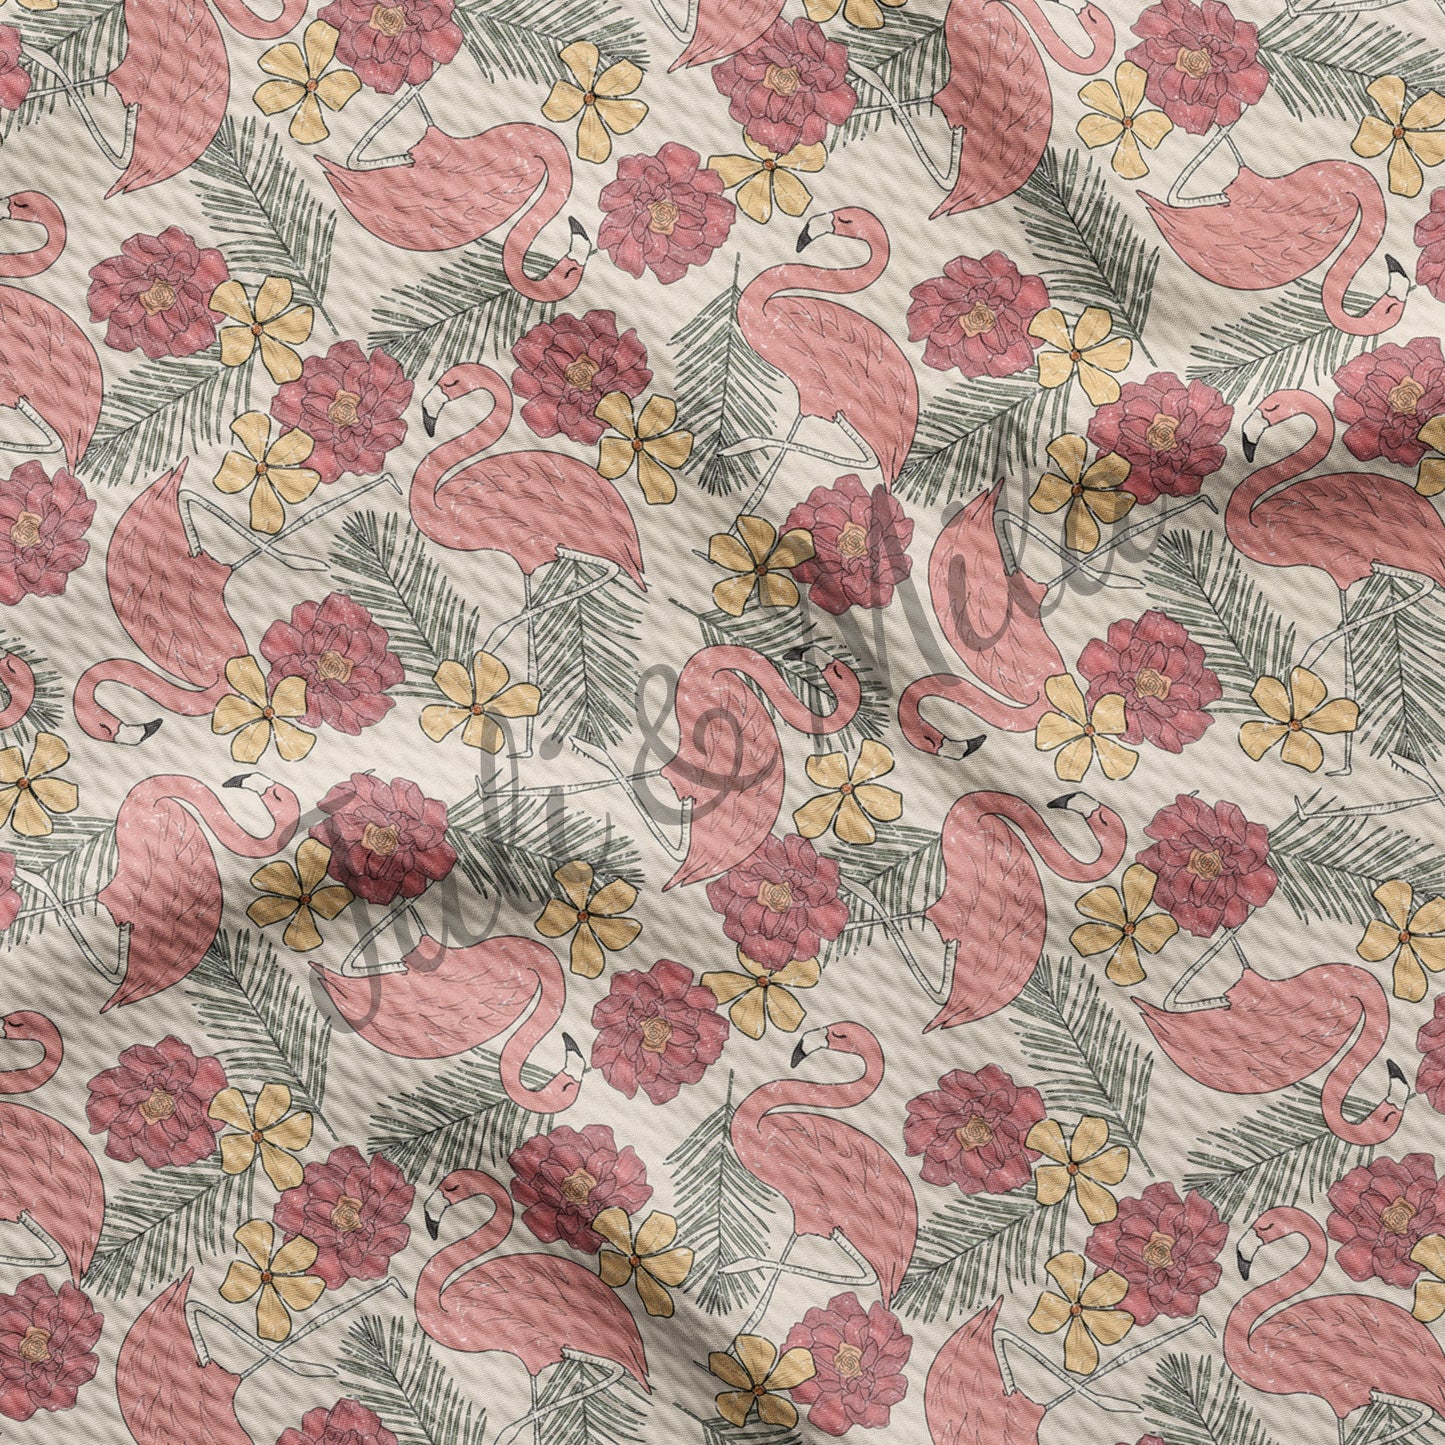 Bullet Textured Fabric  Floral62